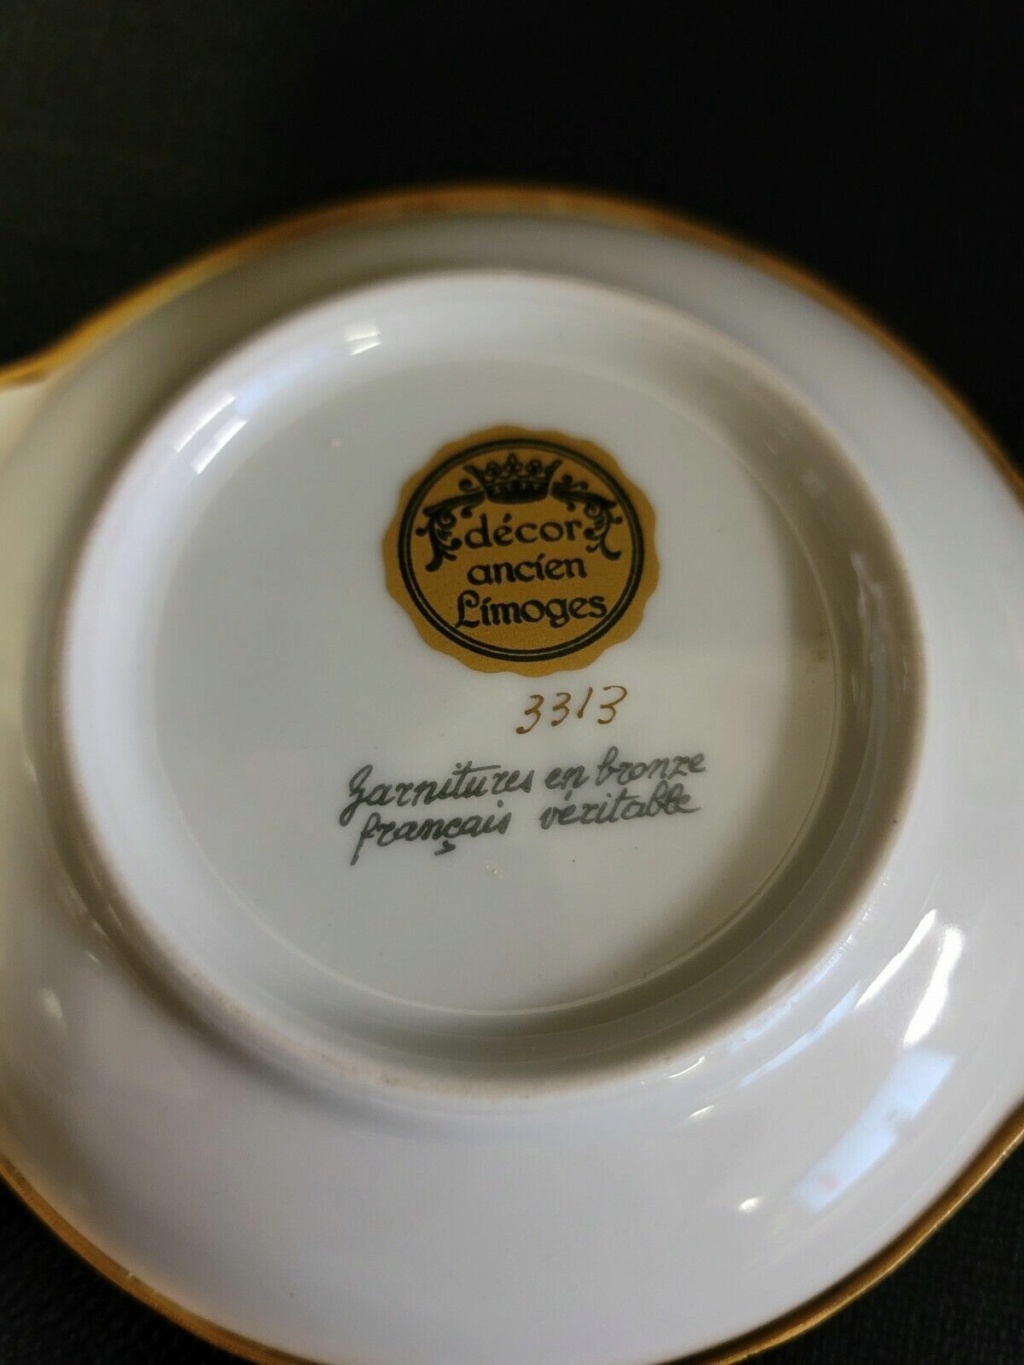 Limoges label. Made in France or China? S-l16010